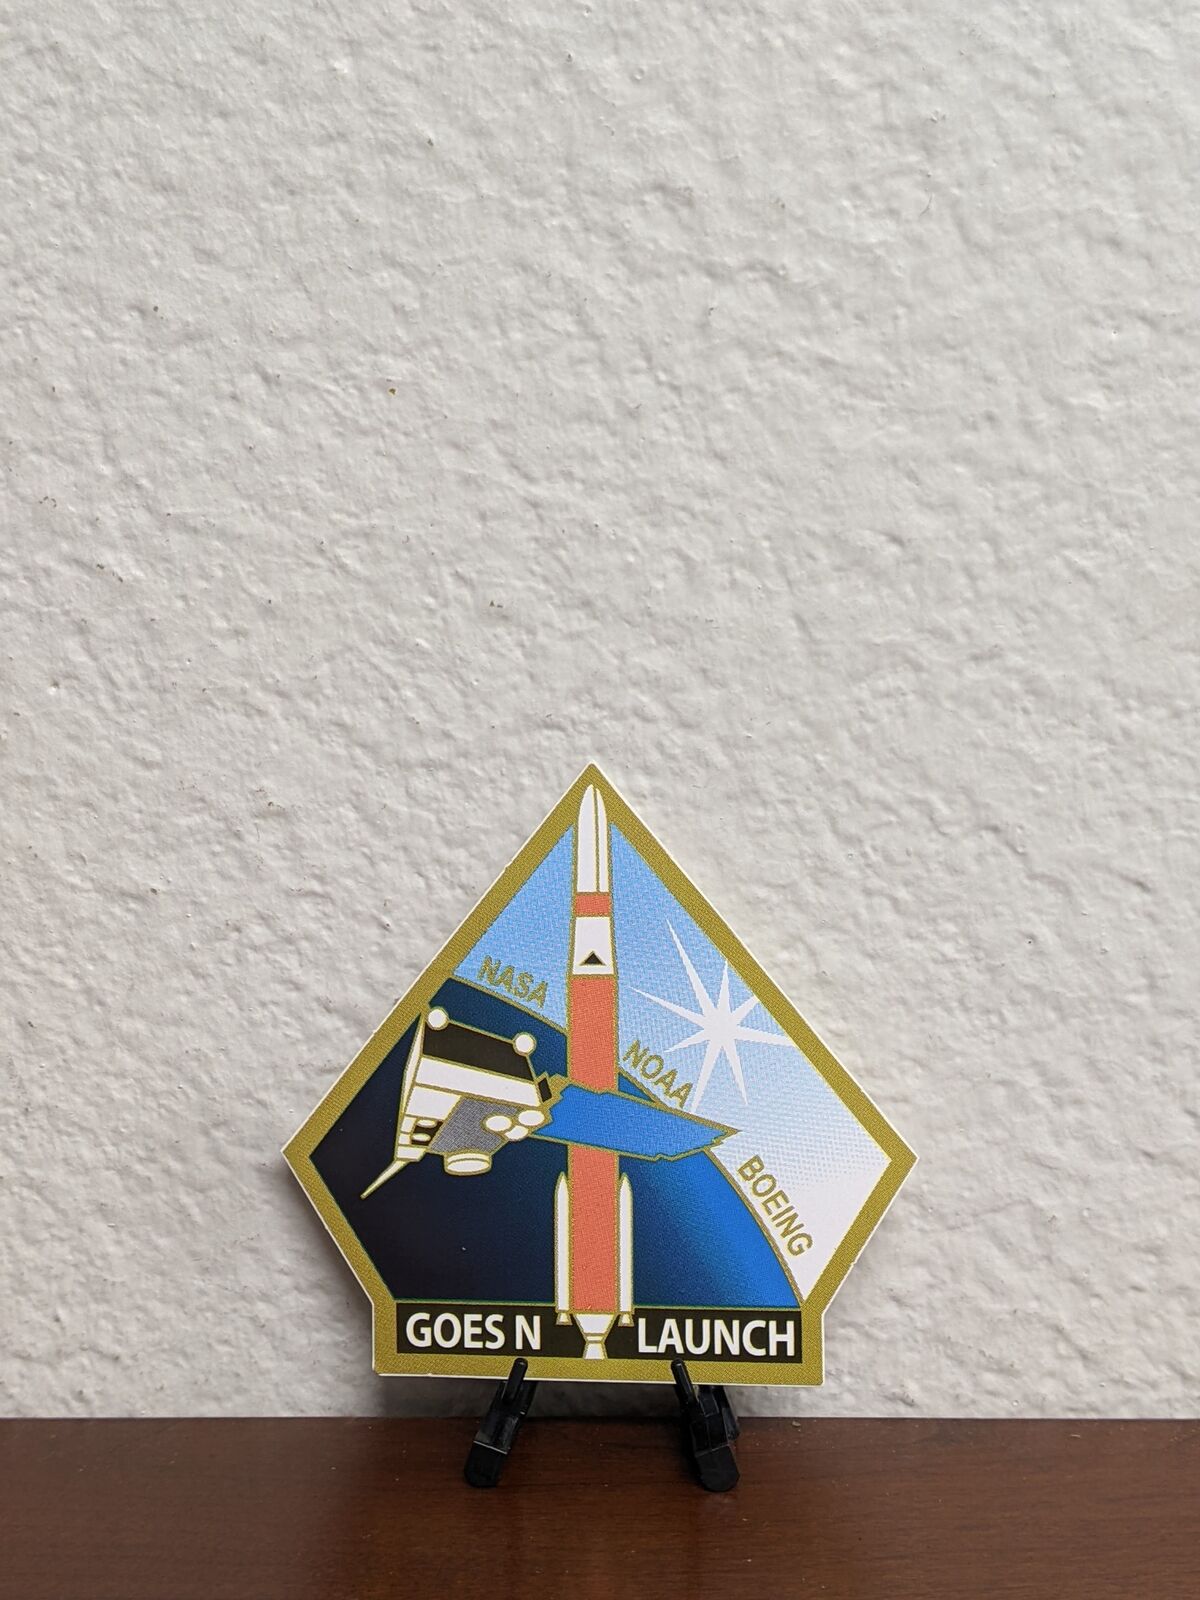 GOES N Launch - NASA - NOAA - Boeing Launch Patch NASA Decal 3.5 x 3.5 in. NEW